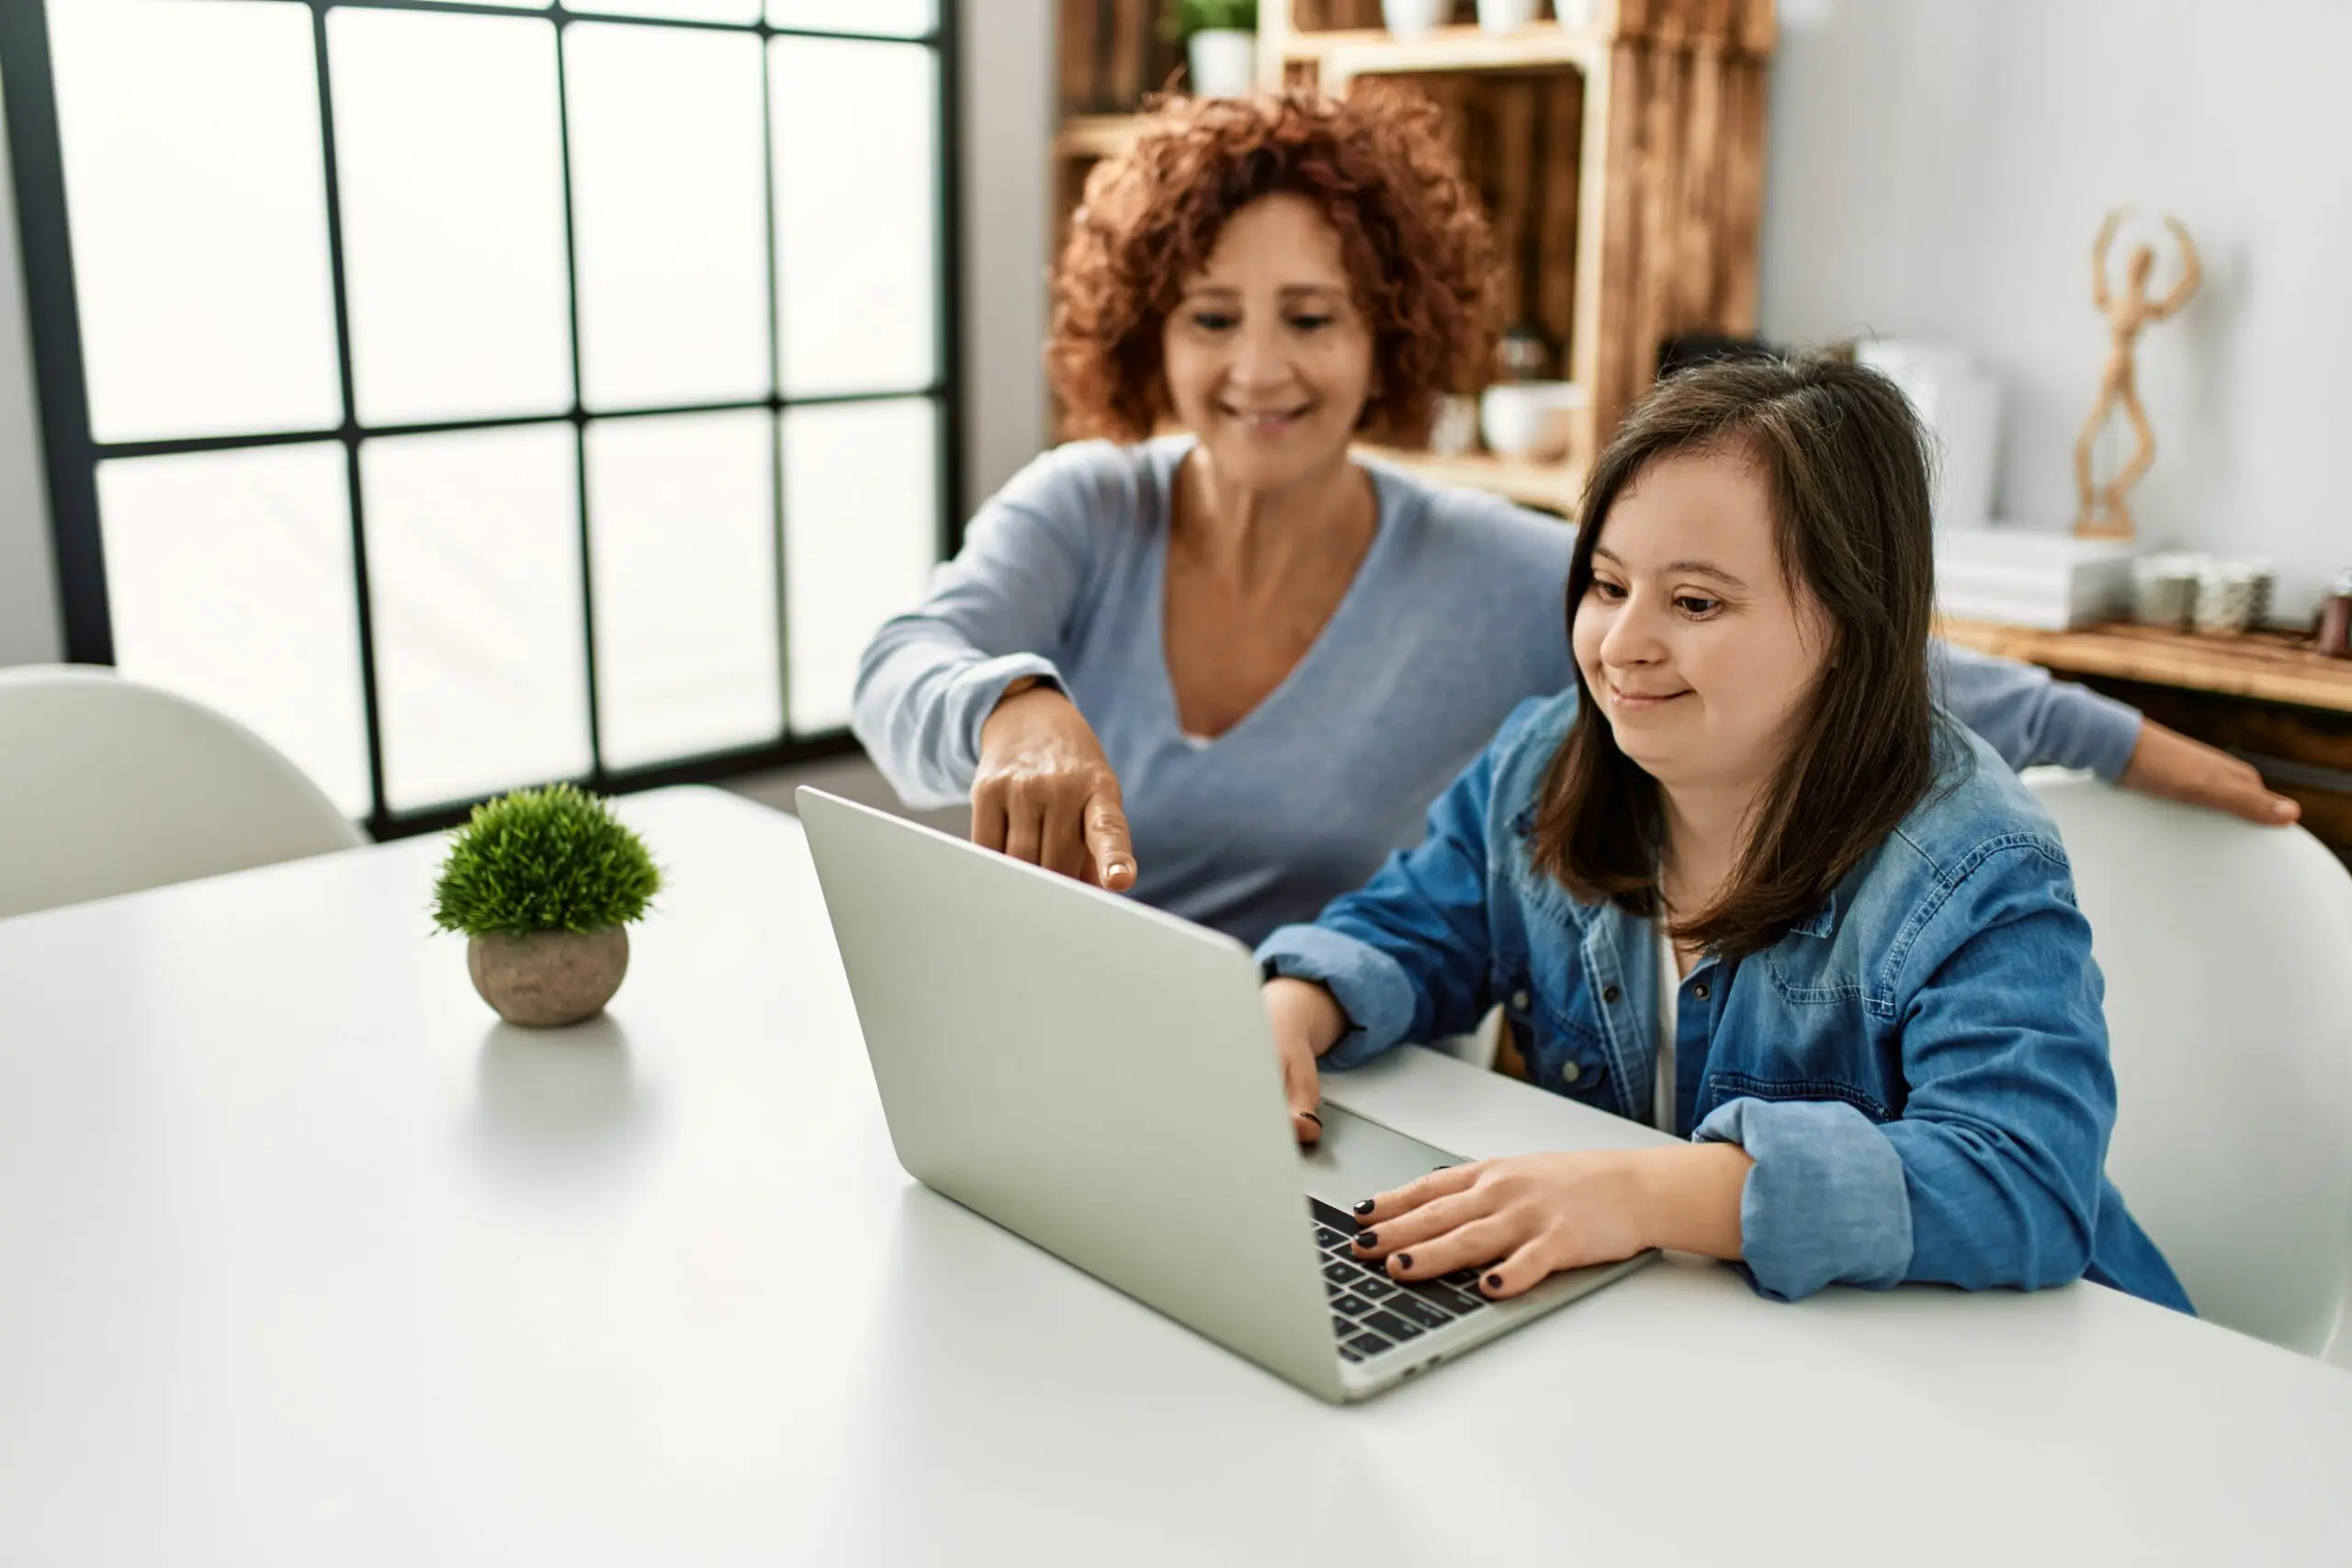 Mature mother and adult daughter with Down syndrome using computer laptop at home